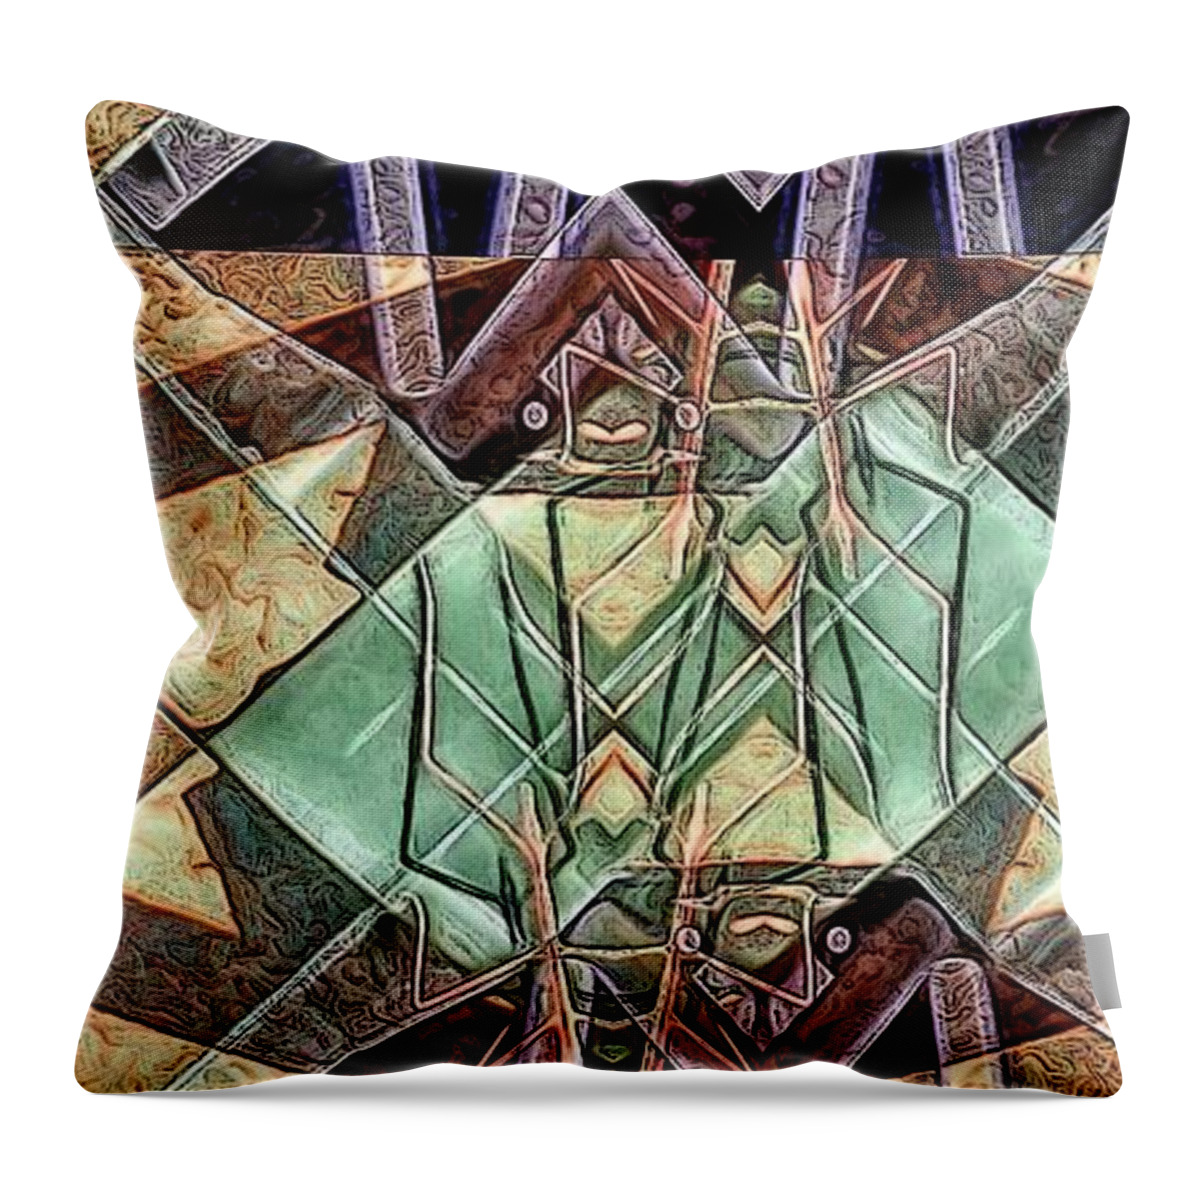 Abstract Throw Pillow featuring the digital art Phasmids by Ronald Bissett